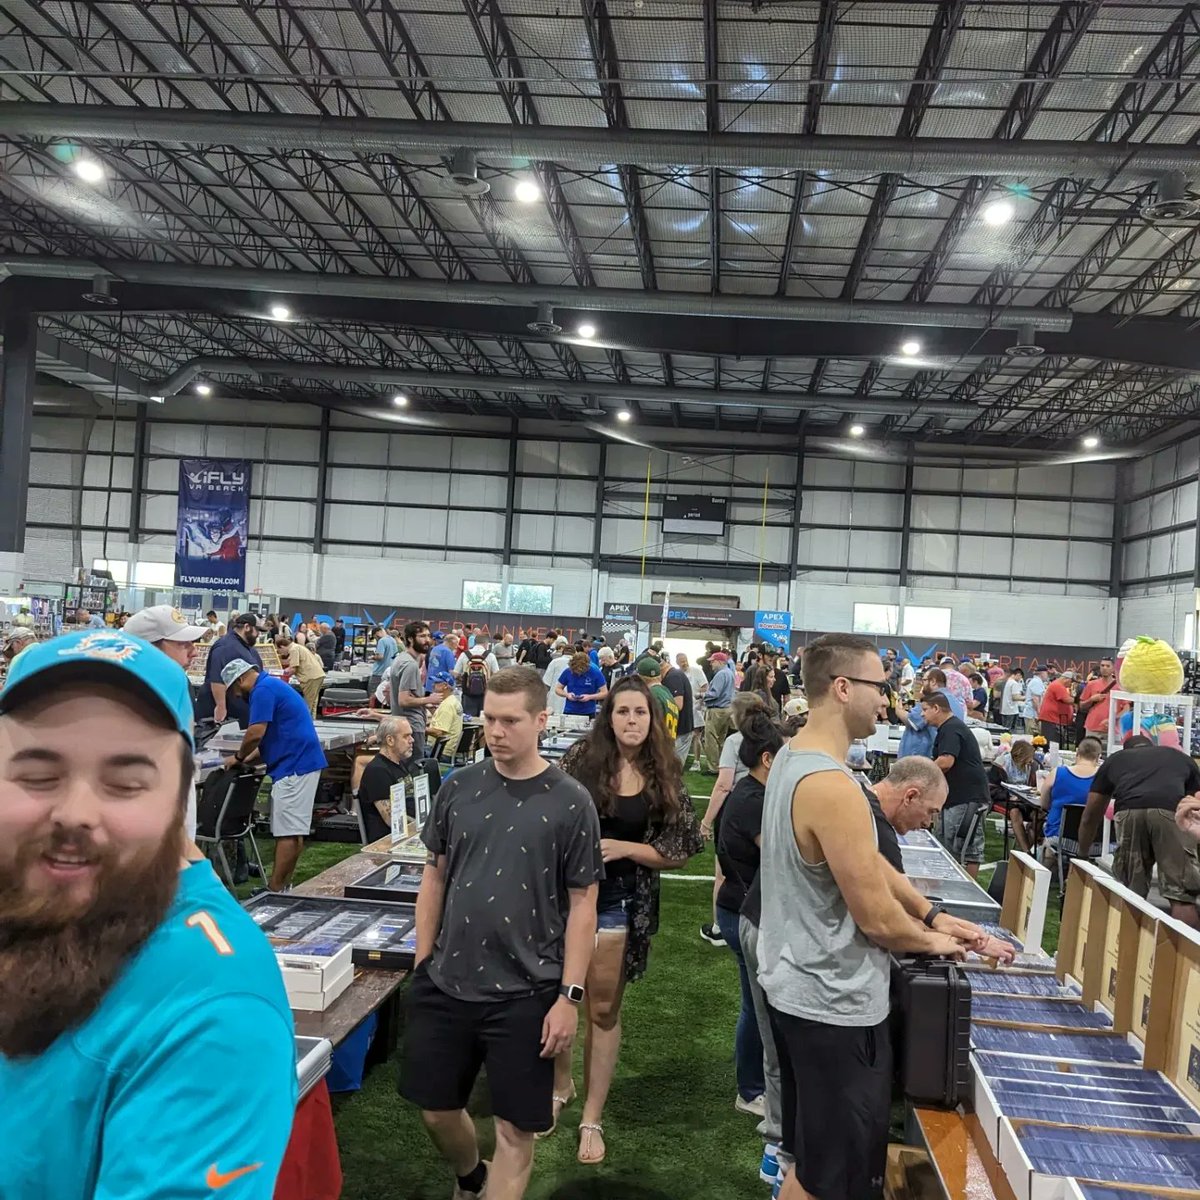 Join us May 11th at the VB Fieldhouse for Tidewater's best and biggest collectibles show.  230 tables of sports cards, comics, pokemon & collectibles.  Free Admission 
#cardshow #thehobby #whodoyoucollect
@CardPurchaser @ChadIanB